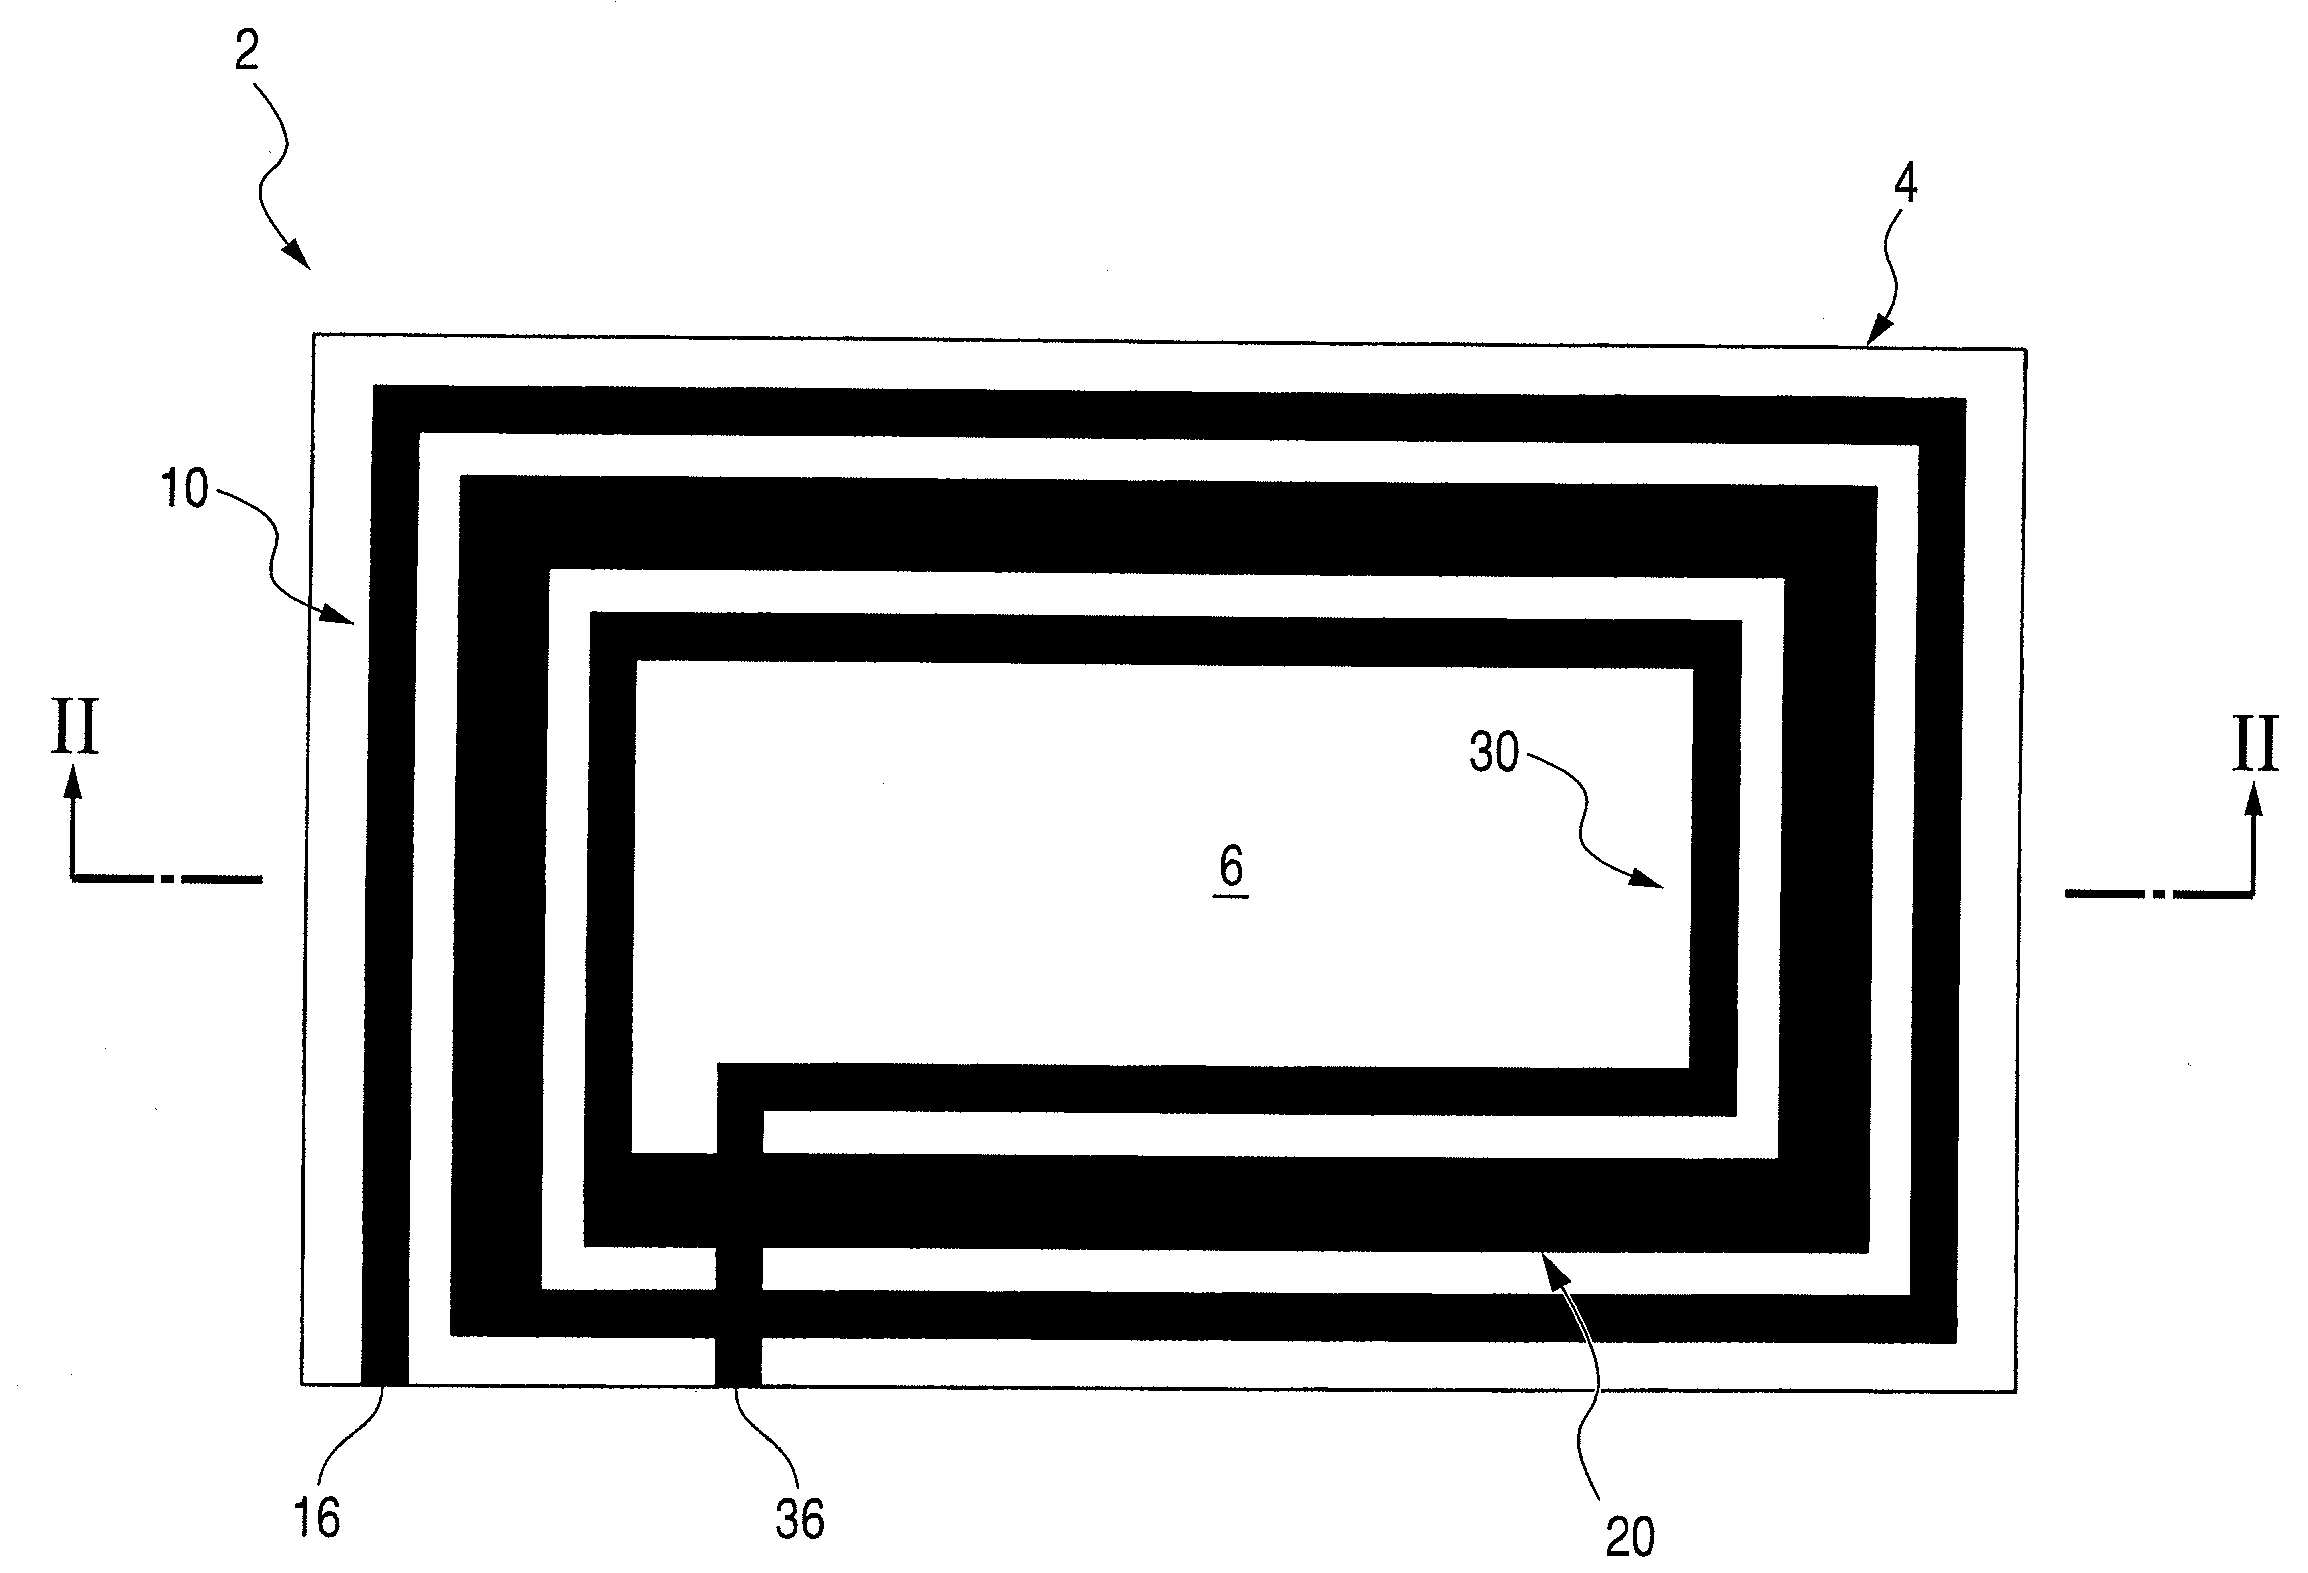 Loop antenna device with large opening area